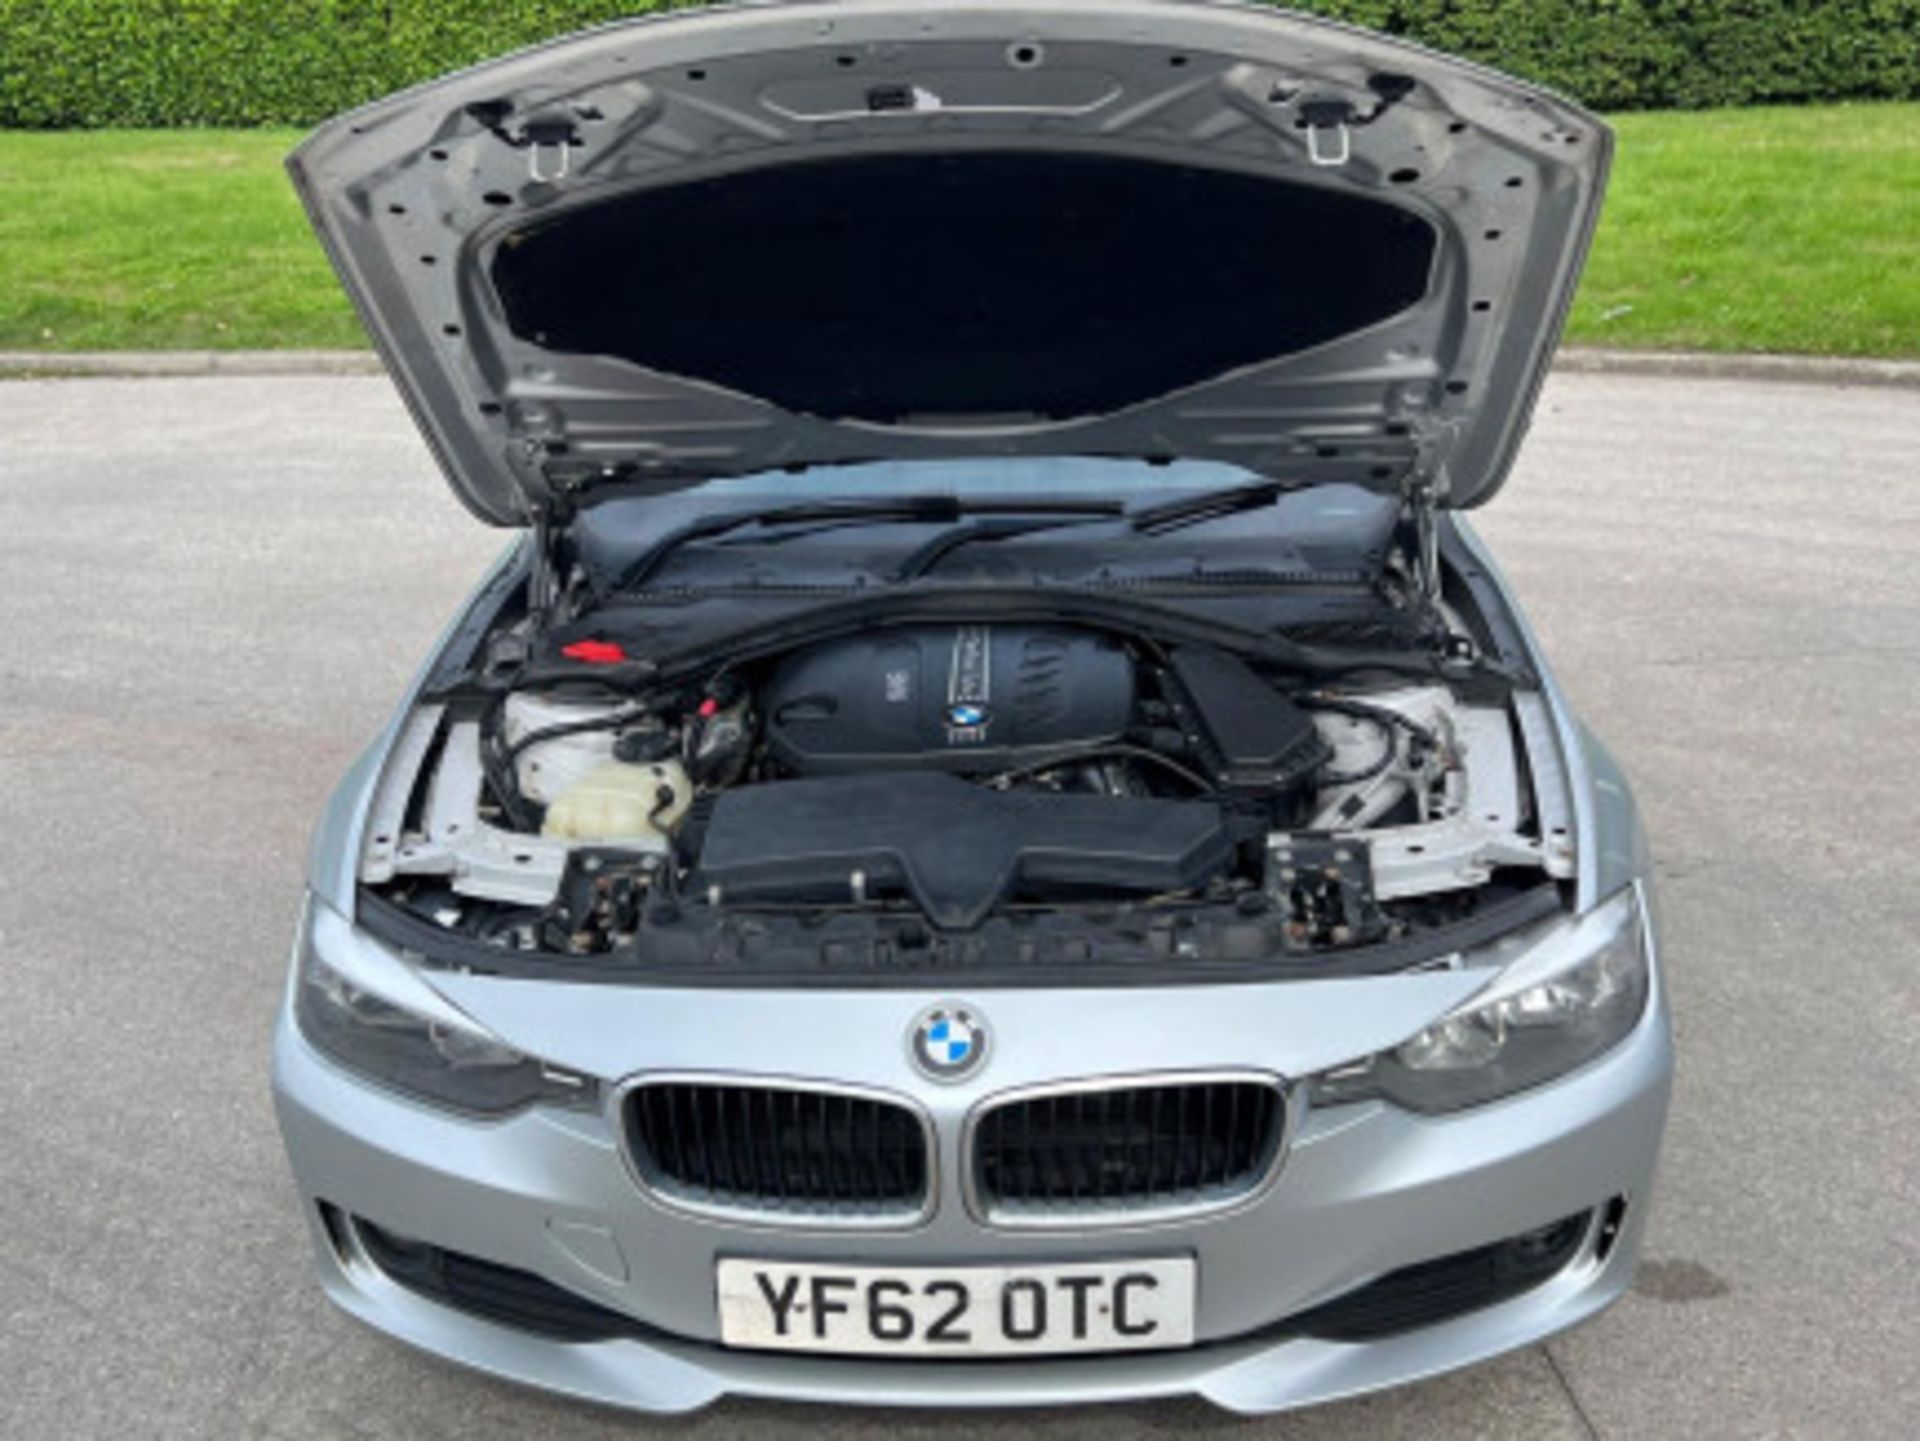 BMW 3 SERIES 2.0 DIESEL ED START STOP - A WELL-MAINTAINED GEM >>--NO VAT ON HAMMER--<< - Image 131 of 229